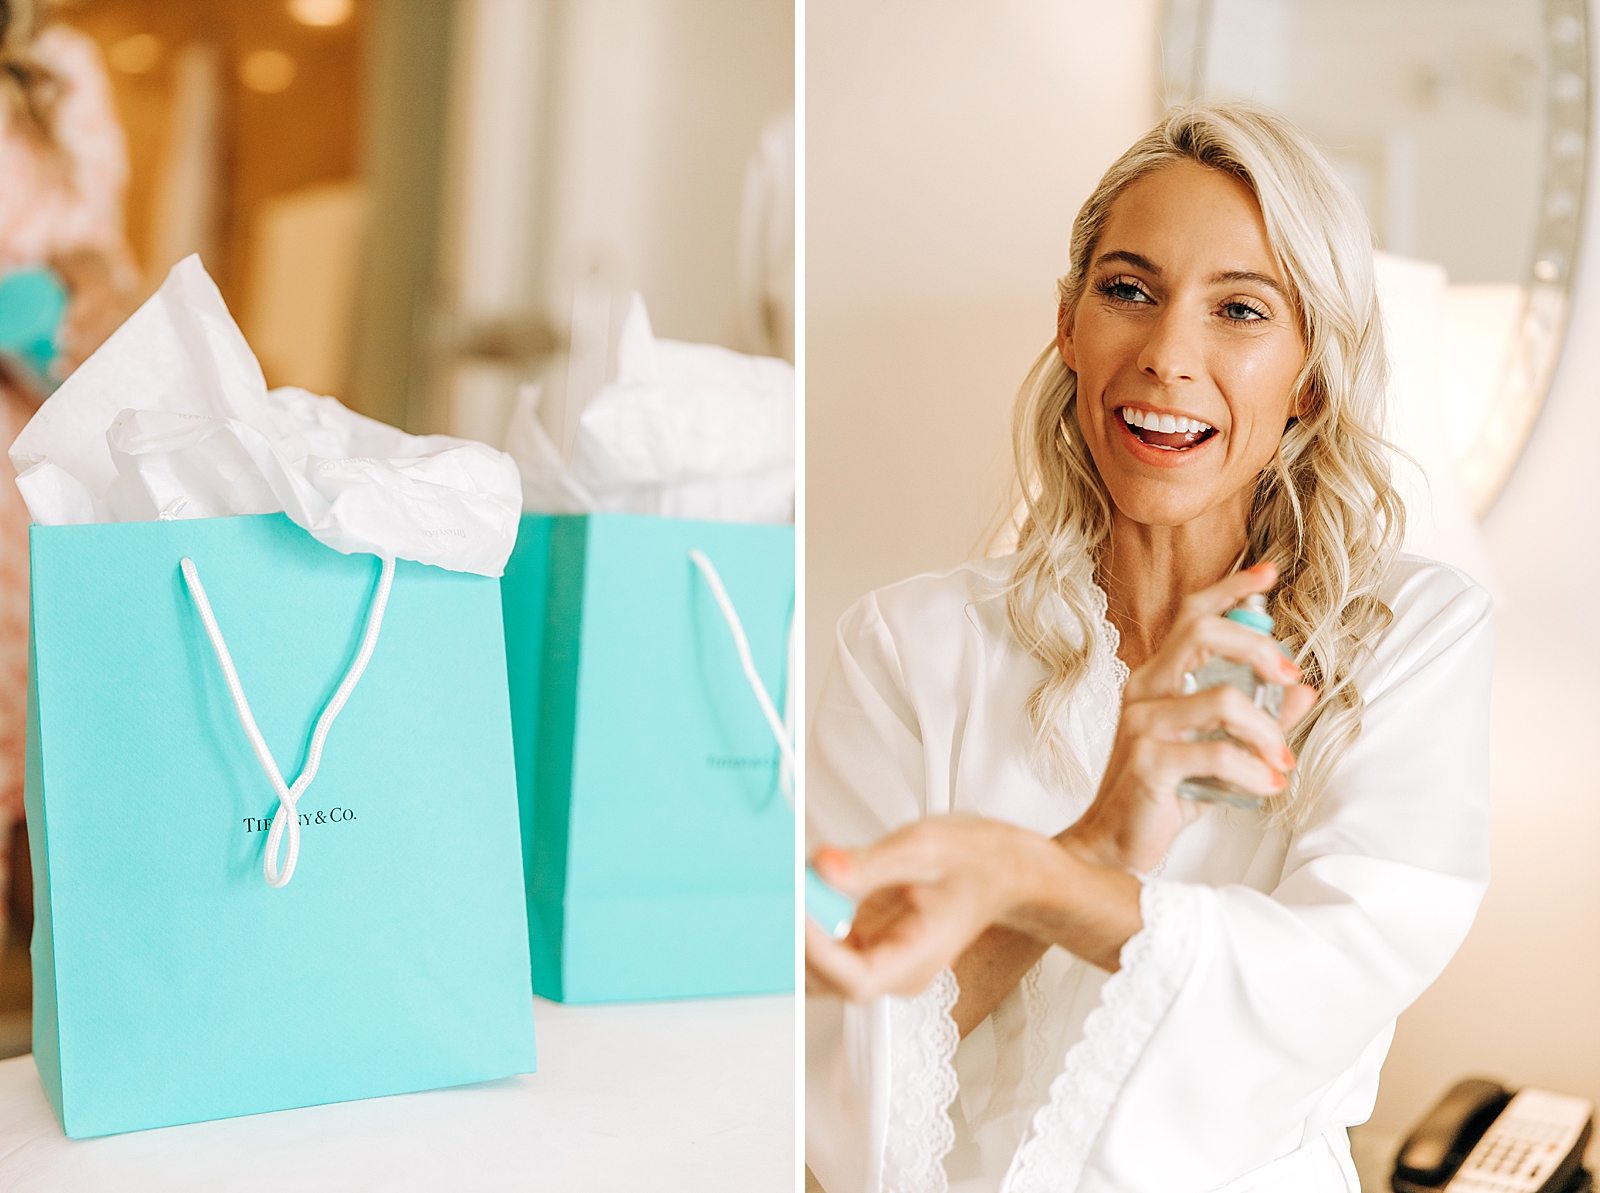 Bride getting ready putting perfume on and with Tiffany & Co. bags